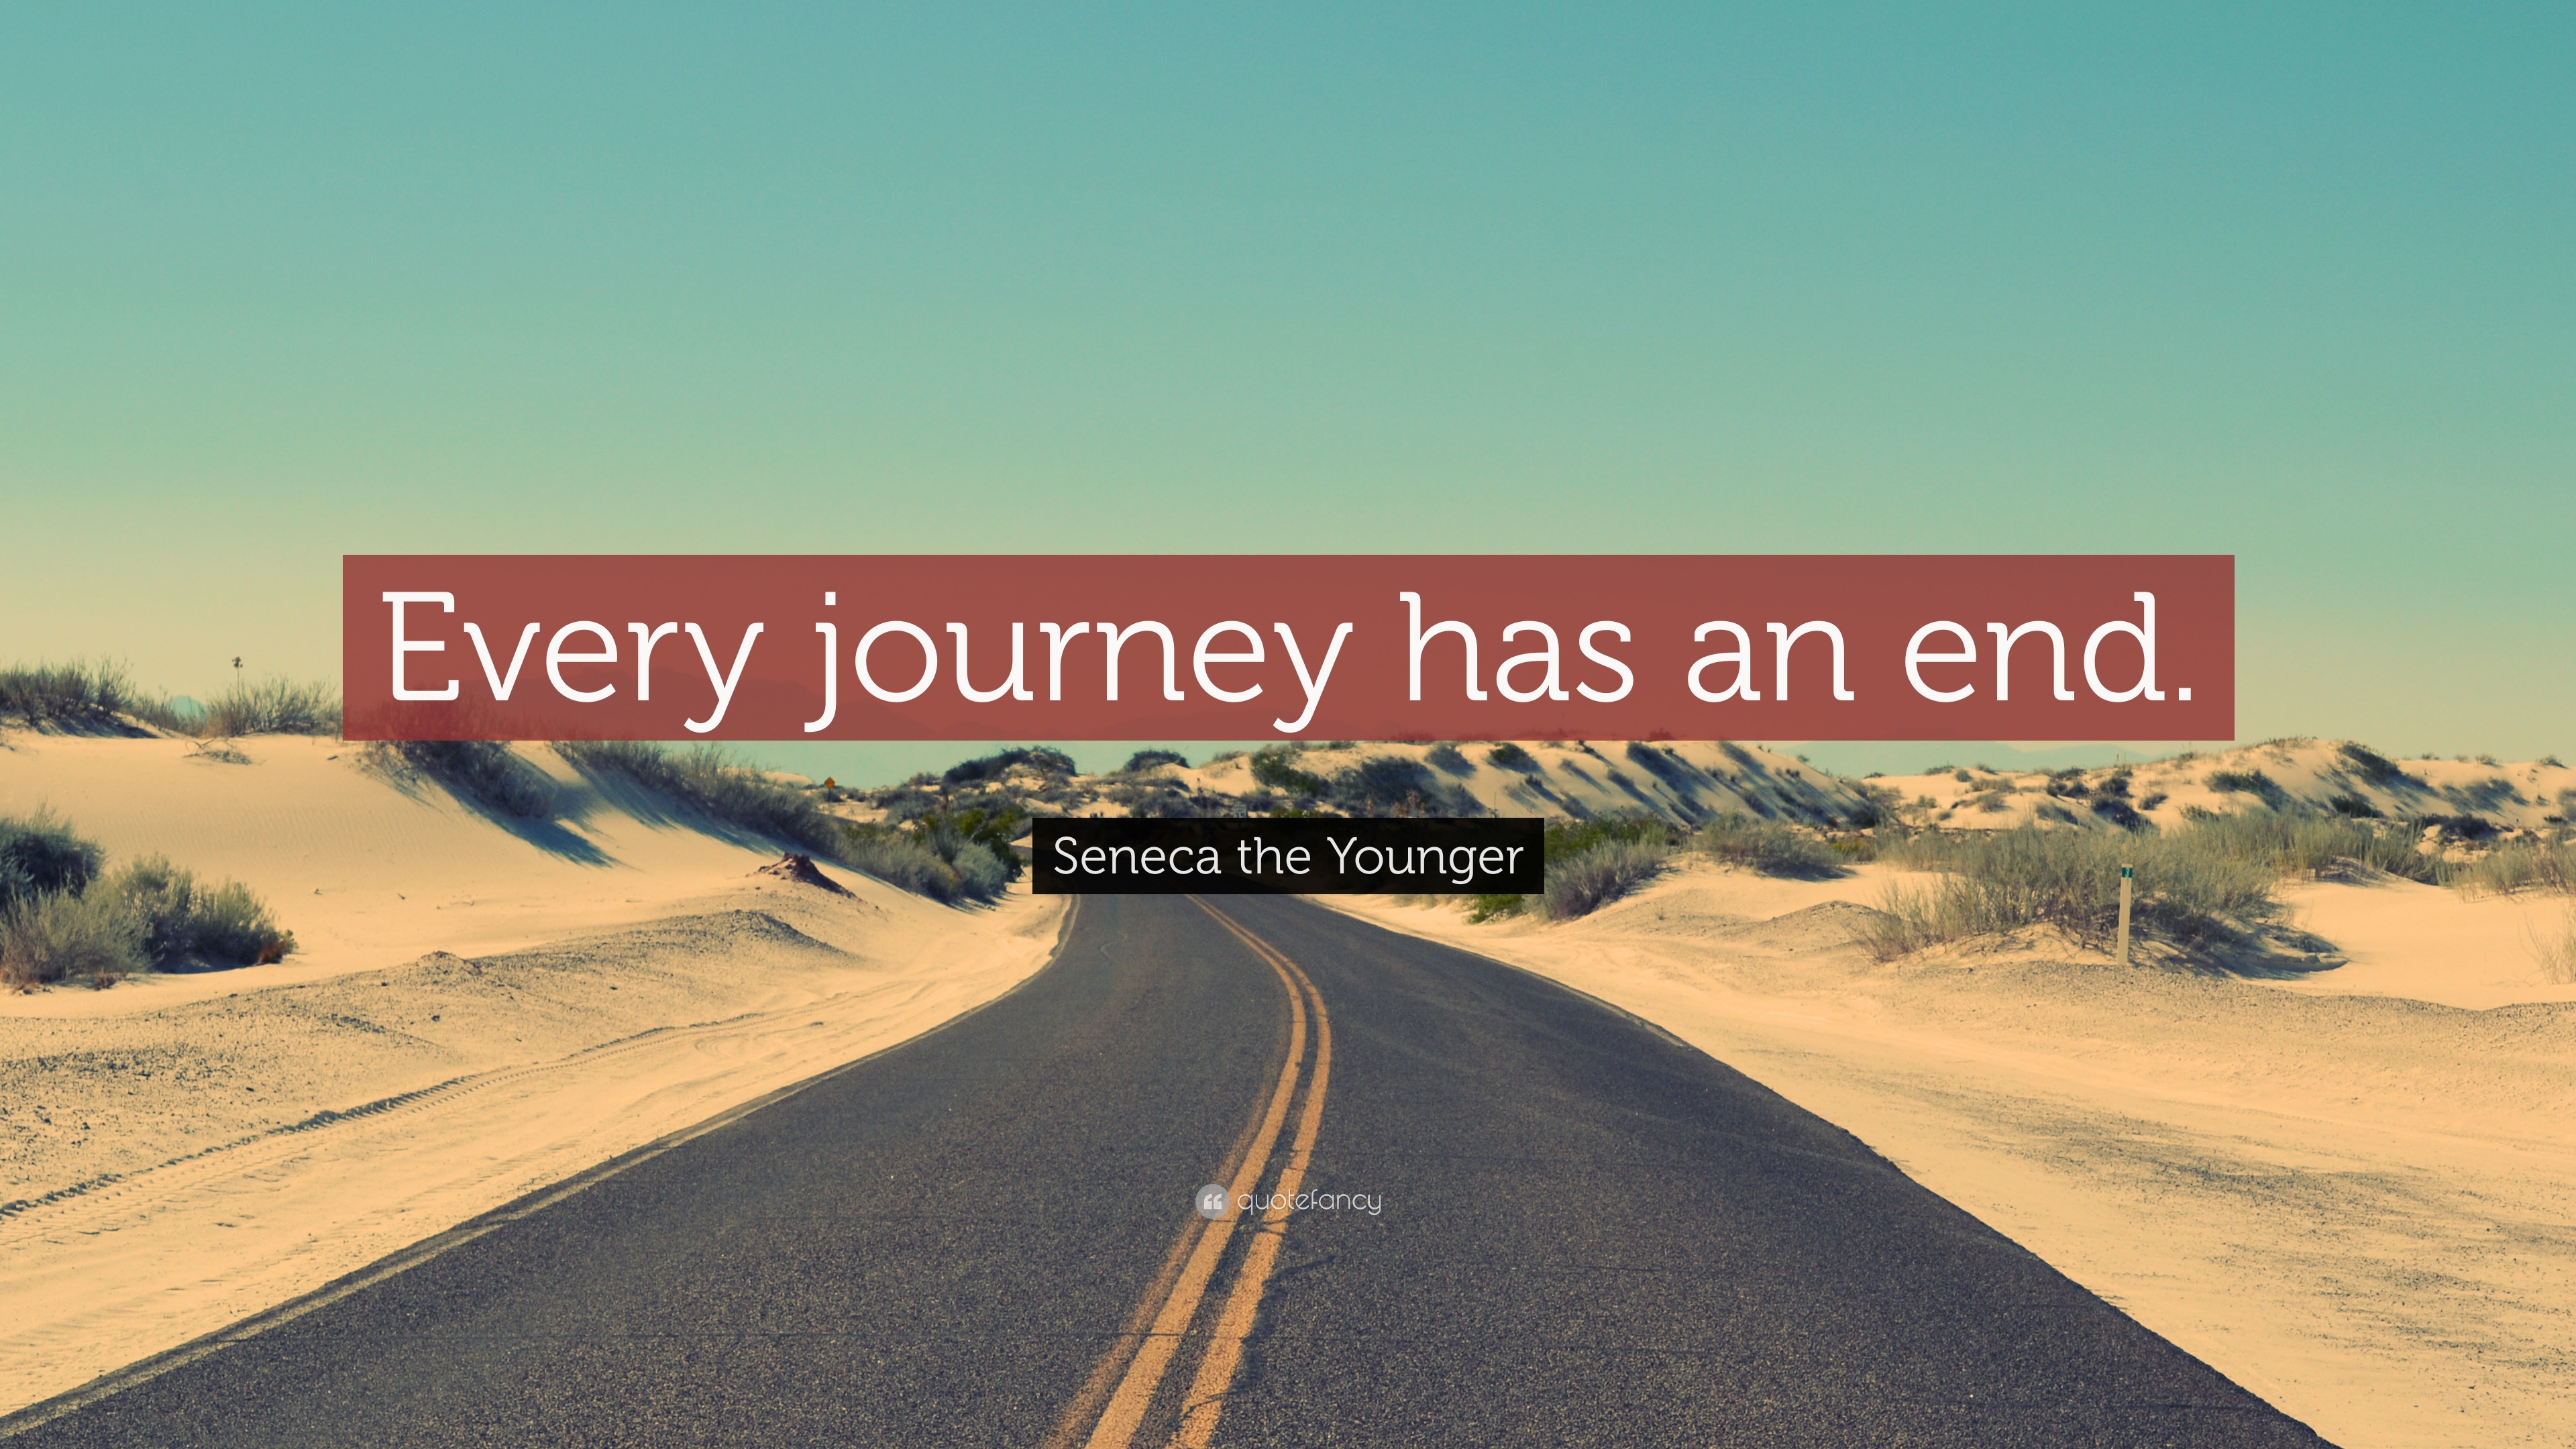 Seneca the Younger Quote “Every journey has an end.”